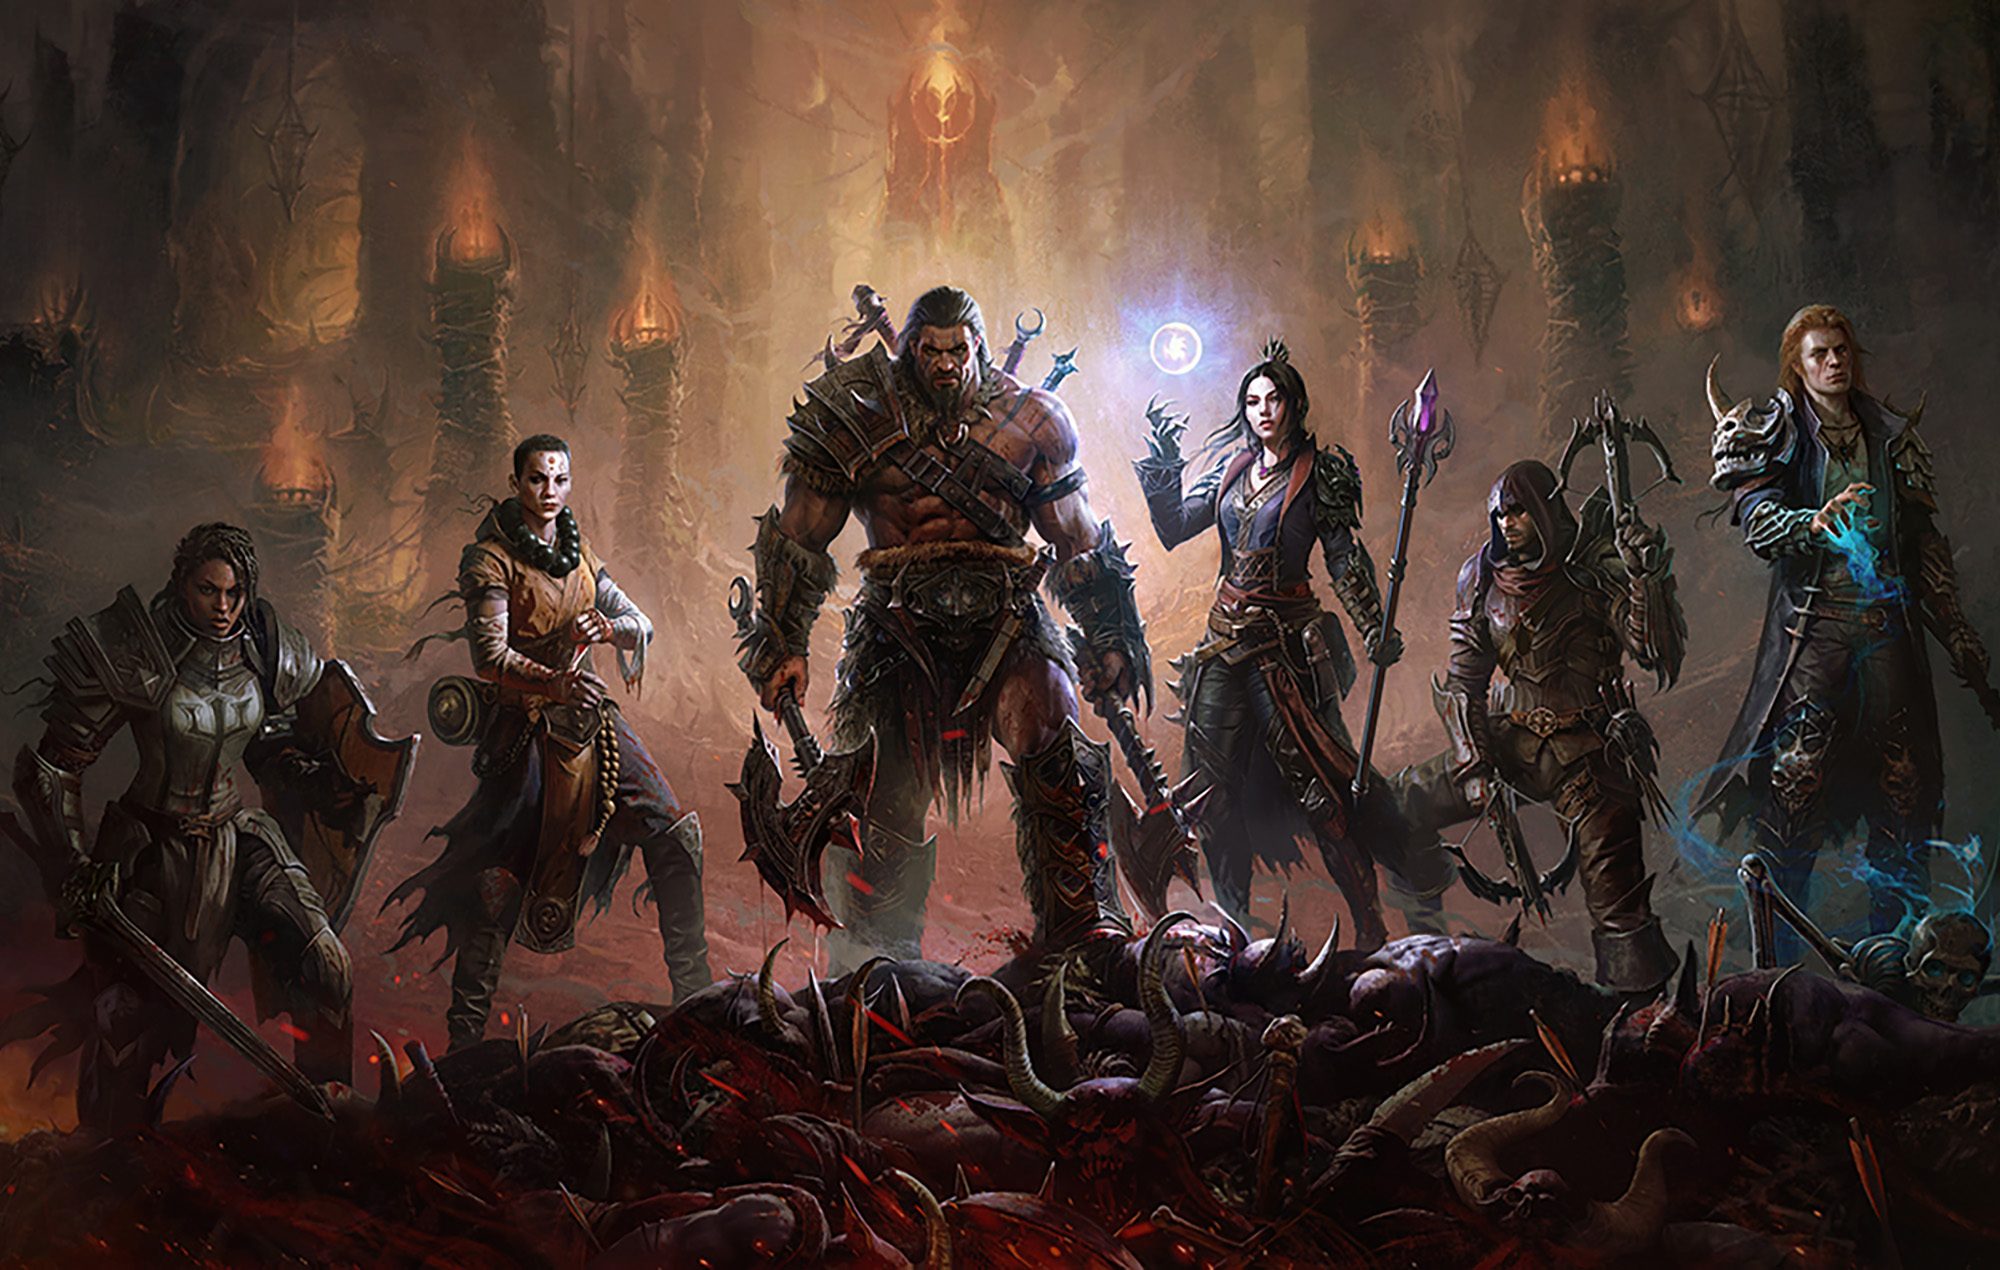 MMORPG.com - This week, Diablo Immortal begins Trial of the Hordes, a new  competitive PvP event, previews the next Battle Pass, and details returning  events like Hungering Moon, and feature improvements.